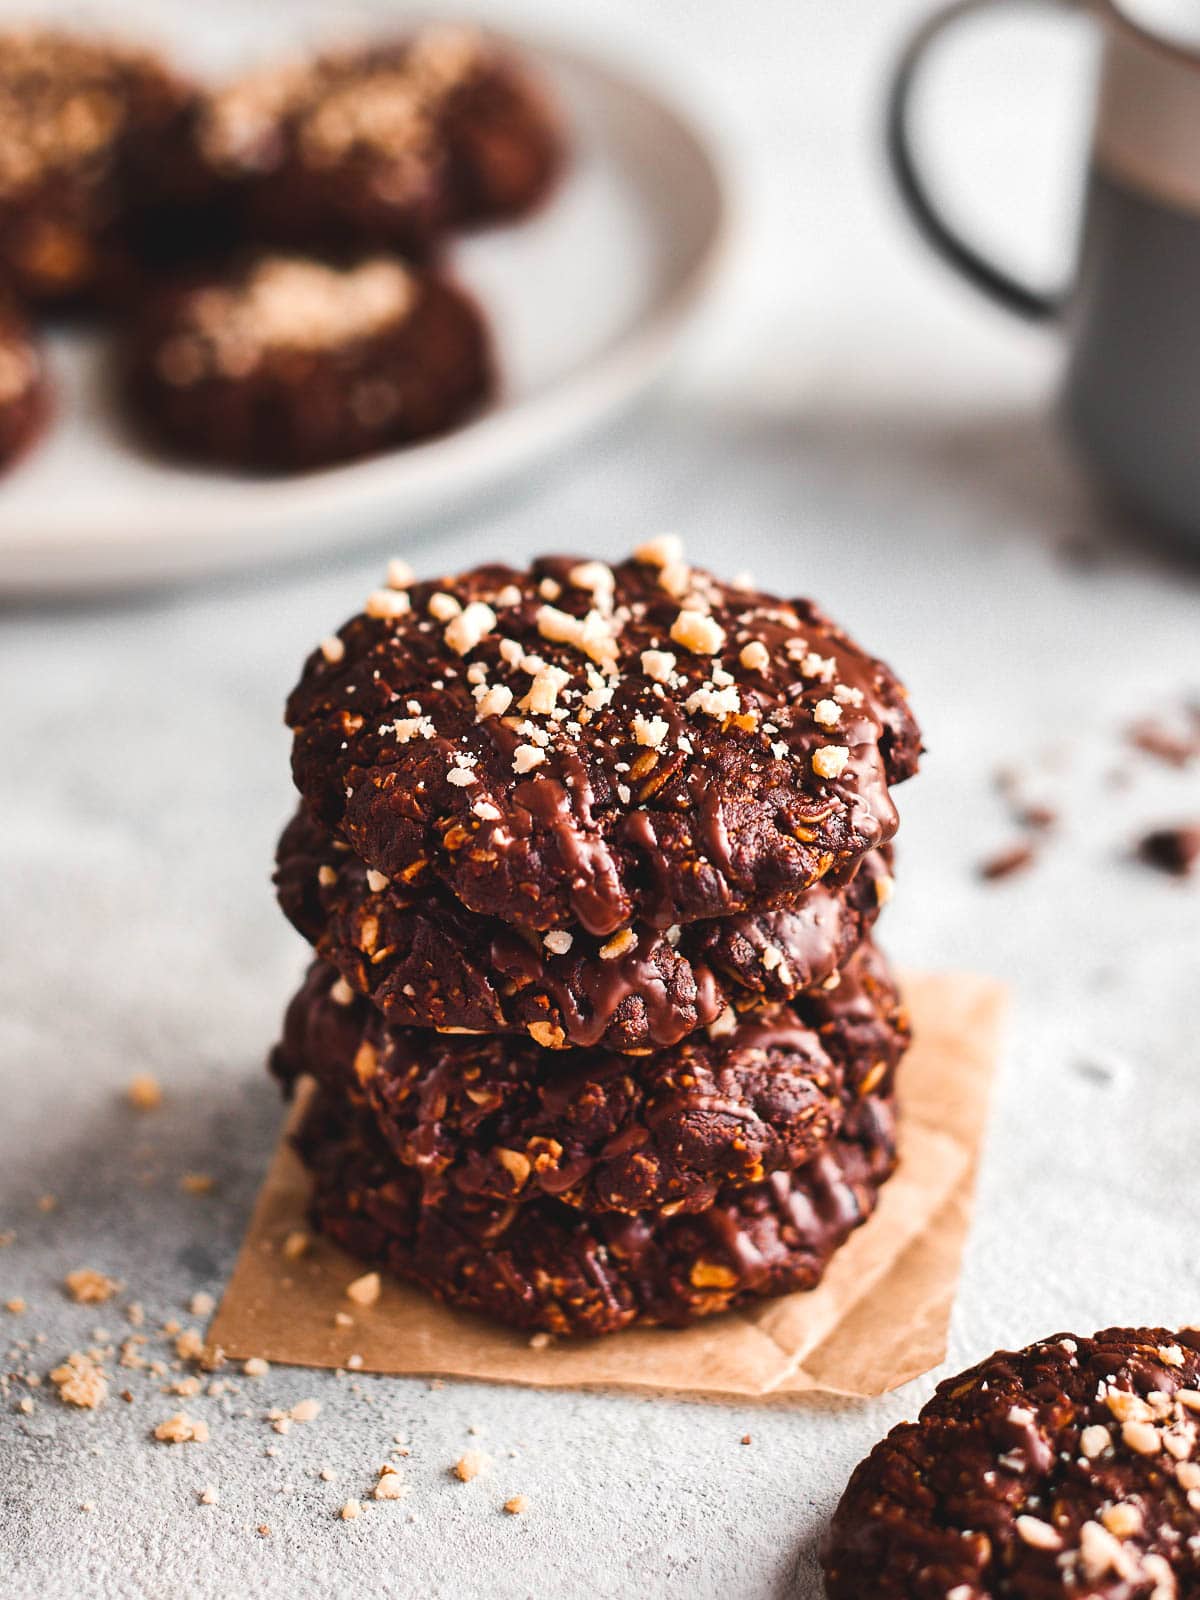 A stack of vegan chocolate oatmeal cookies with a plate of cookies and a mug behind